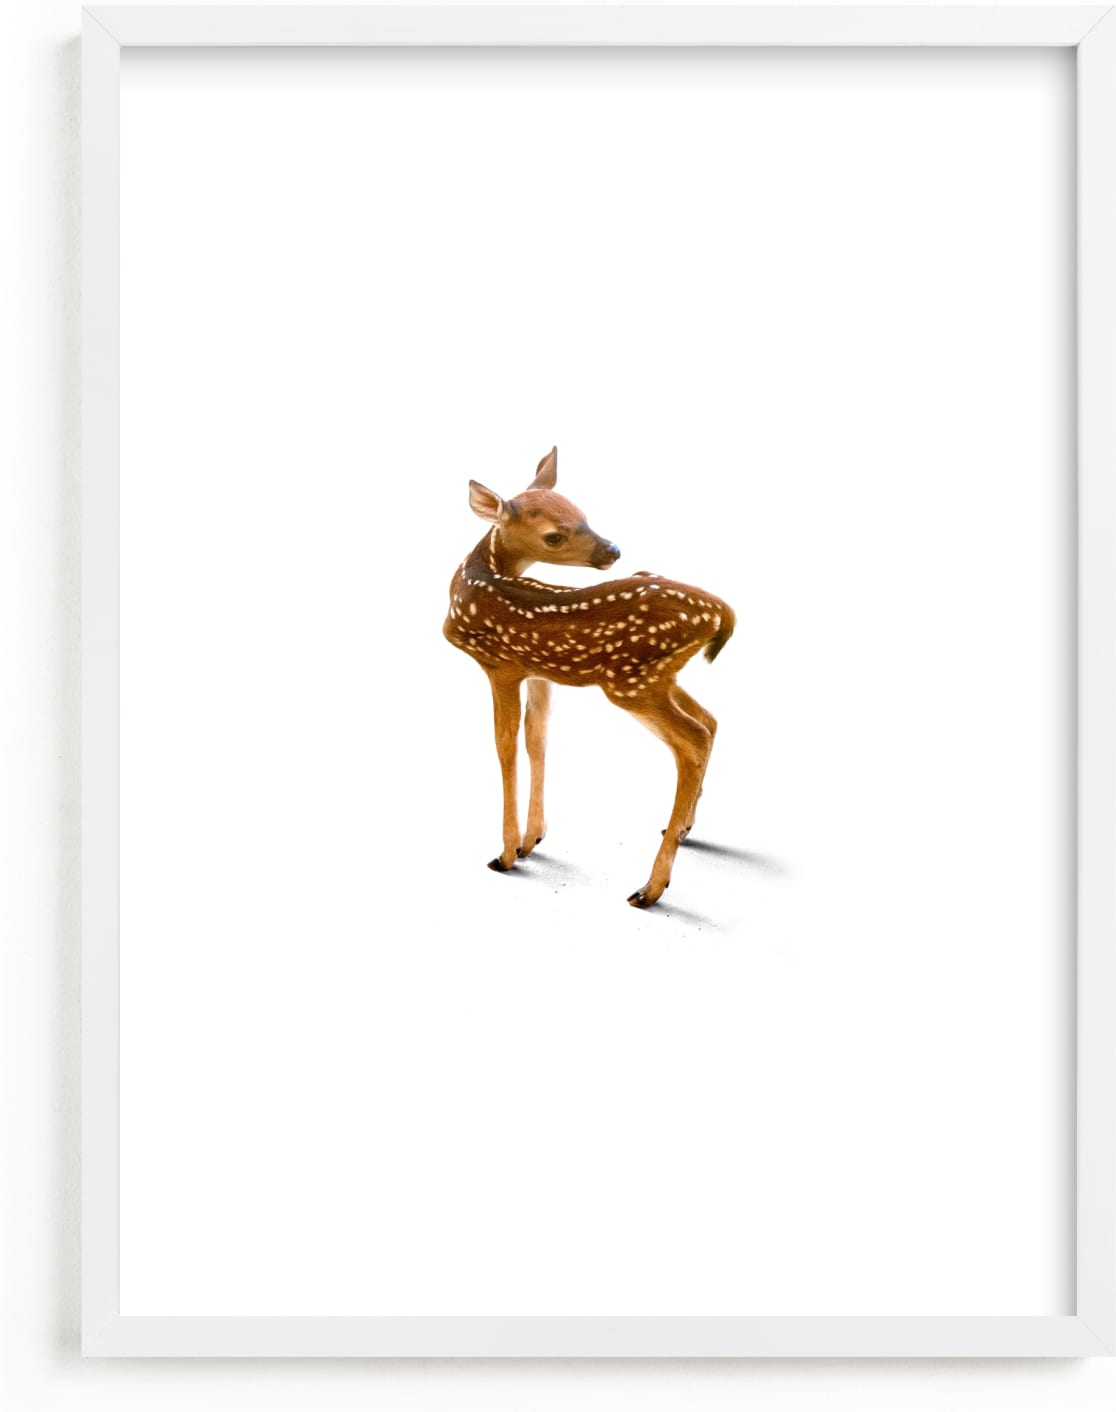 This is a brown kids wall art by Andrew McClintock called A Deer Friend.